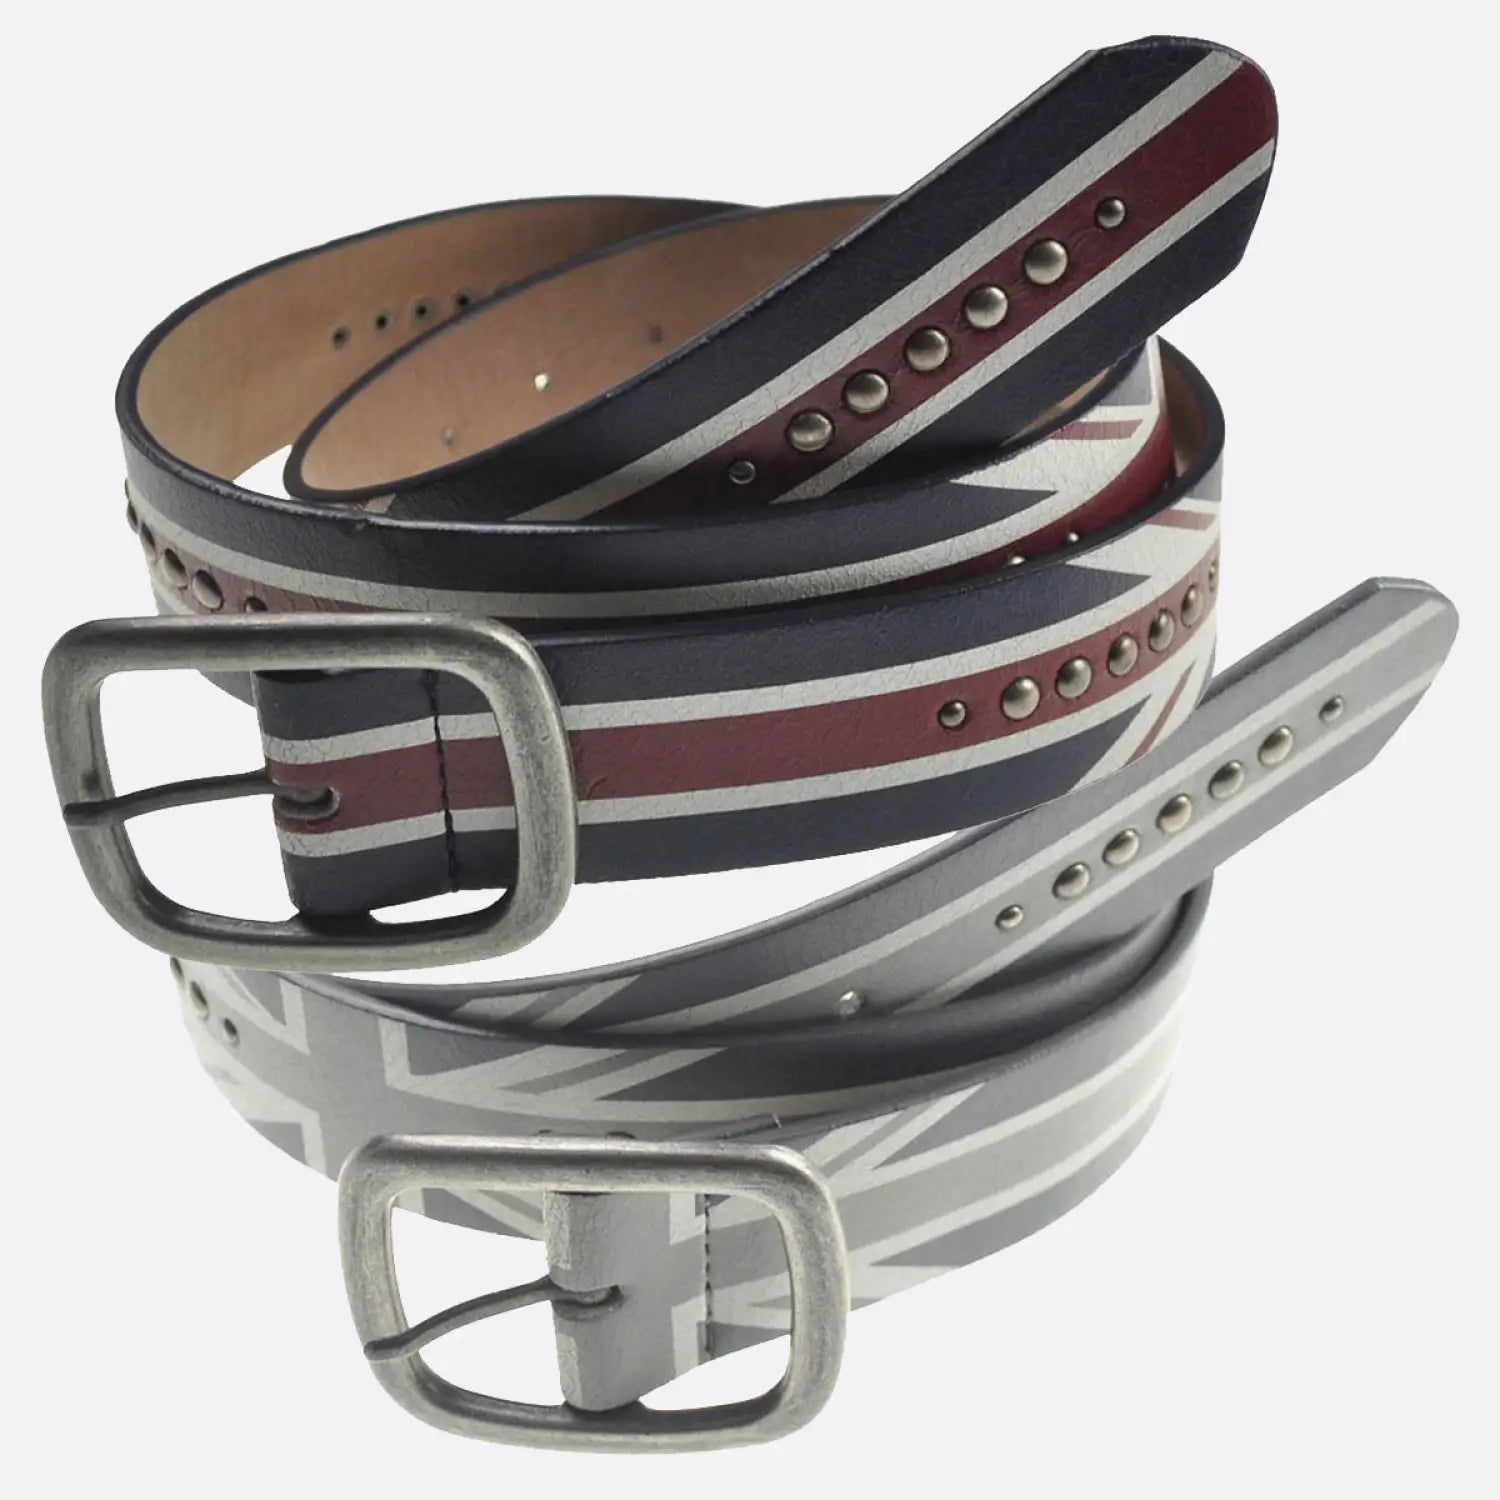 Union Jack Antique PU Leather Belts with Metal Buckles